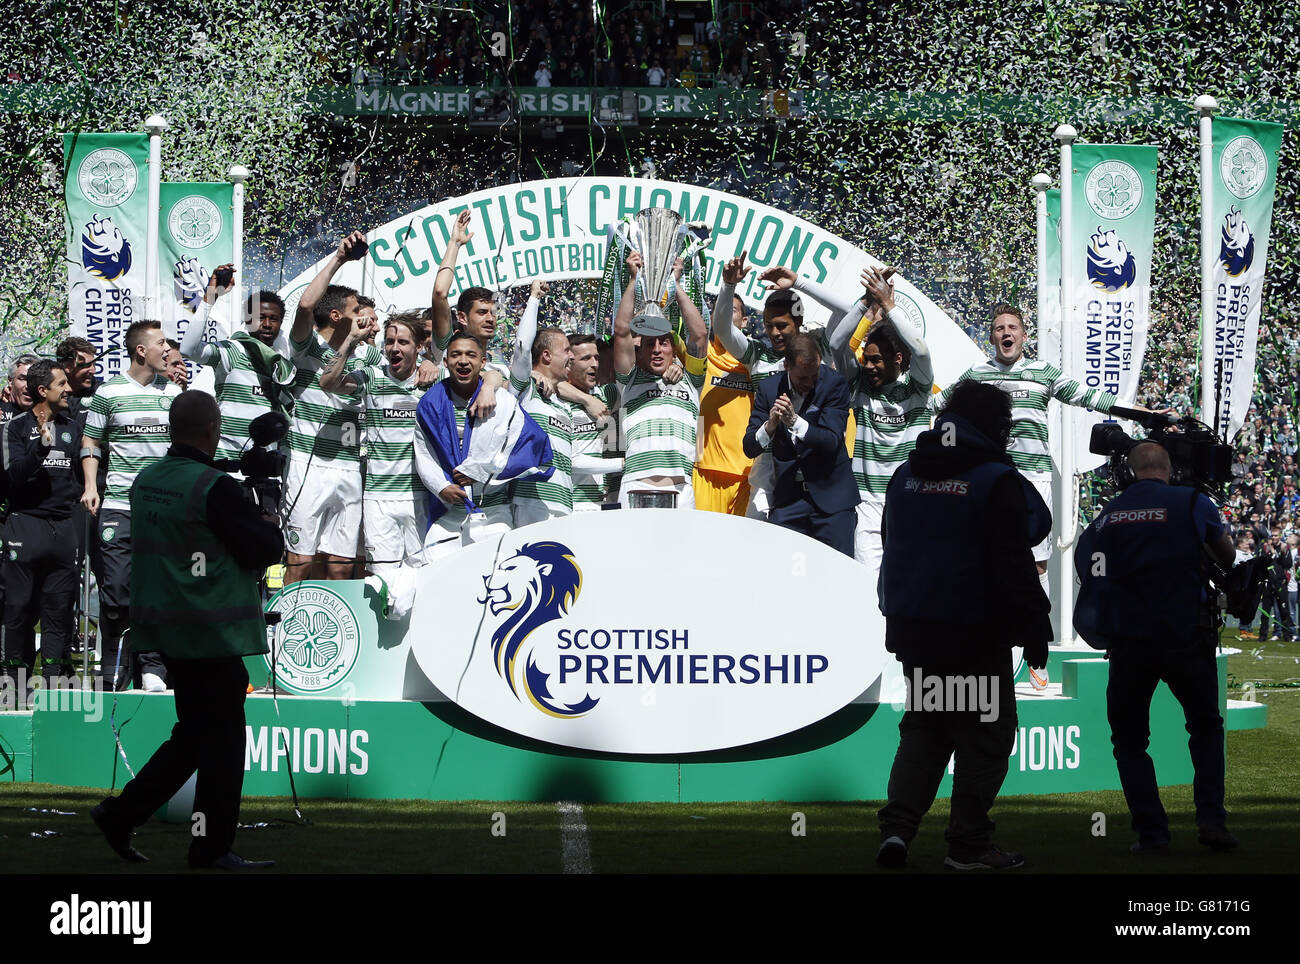 Celtic celebrate winning the Scottish Premiership following the the Scottish Premiership match at Celtic Park, Glasgow. PRESS ASSOCIATION Photo. Picture date: Sunday May 24, 2015. See PA story SOCCER Celtic. Photo credit should read: Danny Lawson/PA Wire. Stock Photo